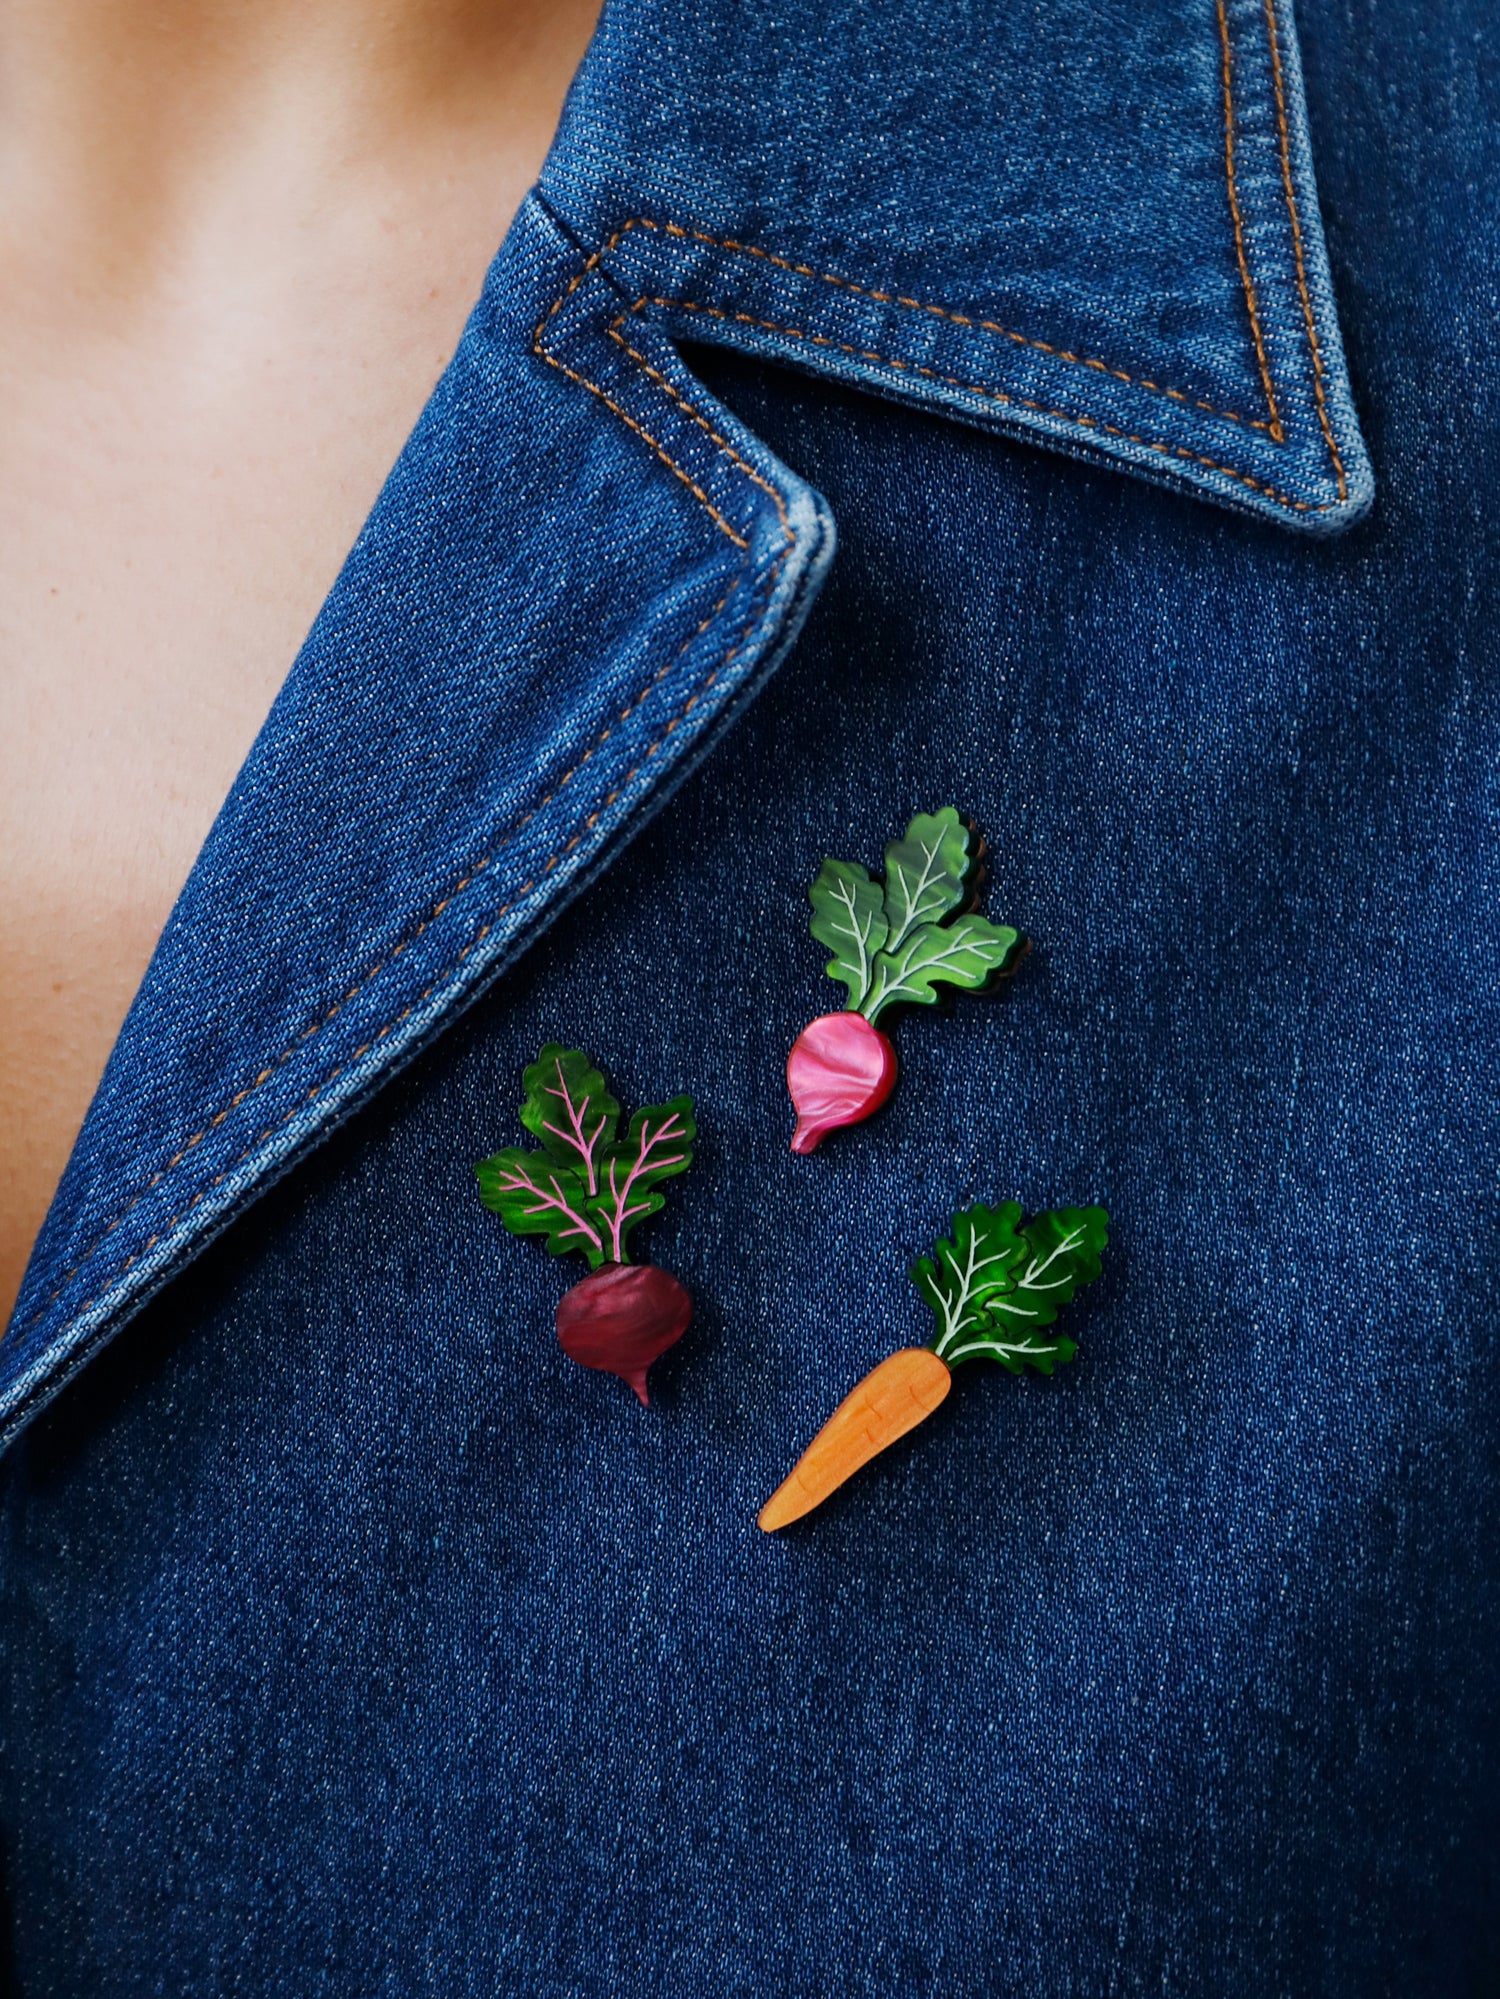 Pin set including our mini carrot, beetroot and radish vegetables. Made with acrylic and our FSC approved wood backing. 1 x silver tone brooch pin & locking clasps. Handmade in London by Wolf & Moon.